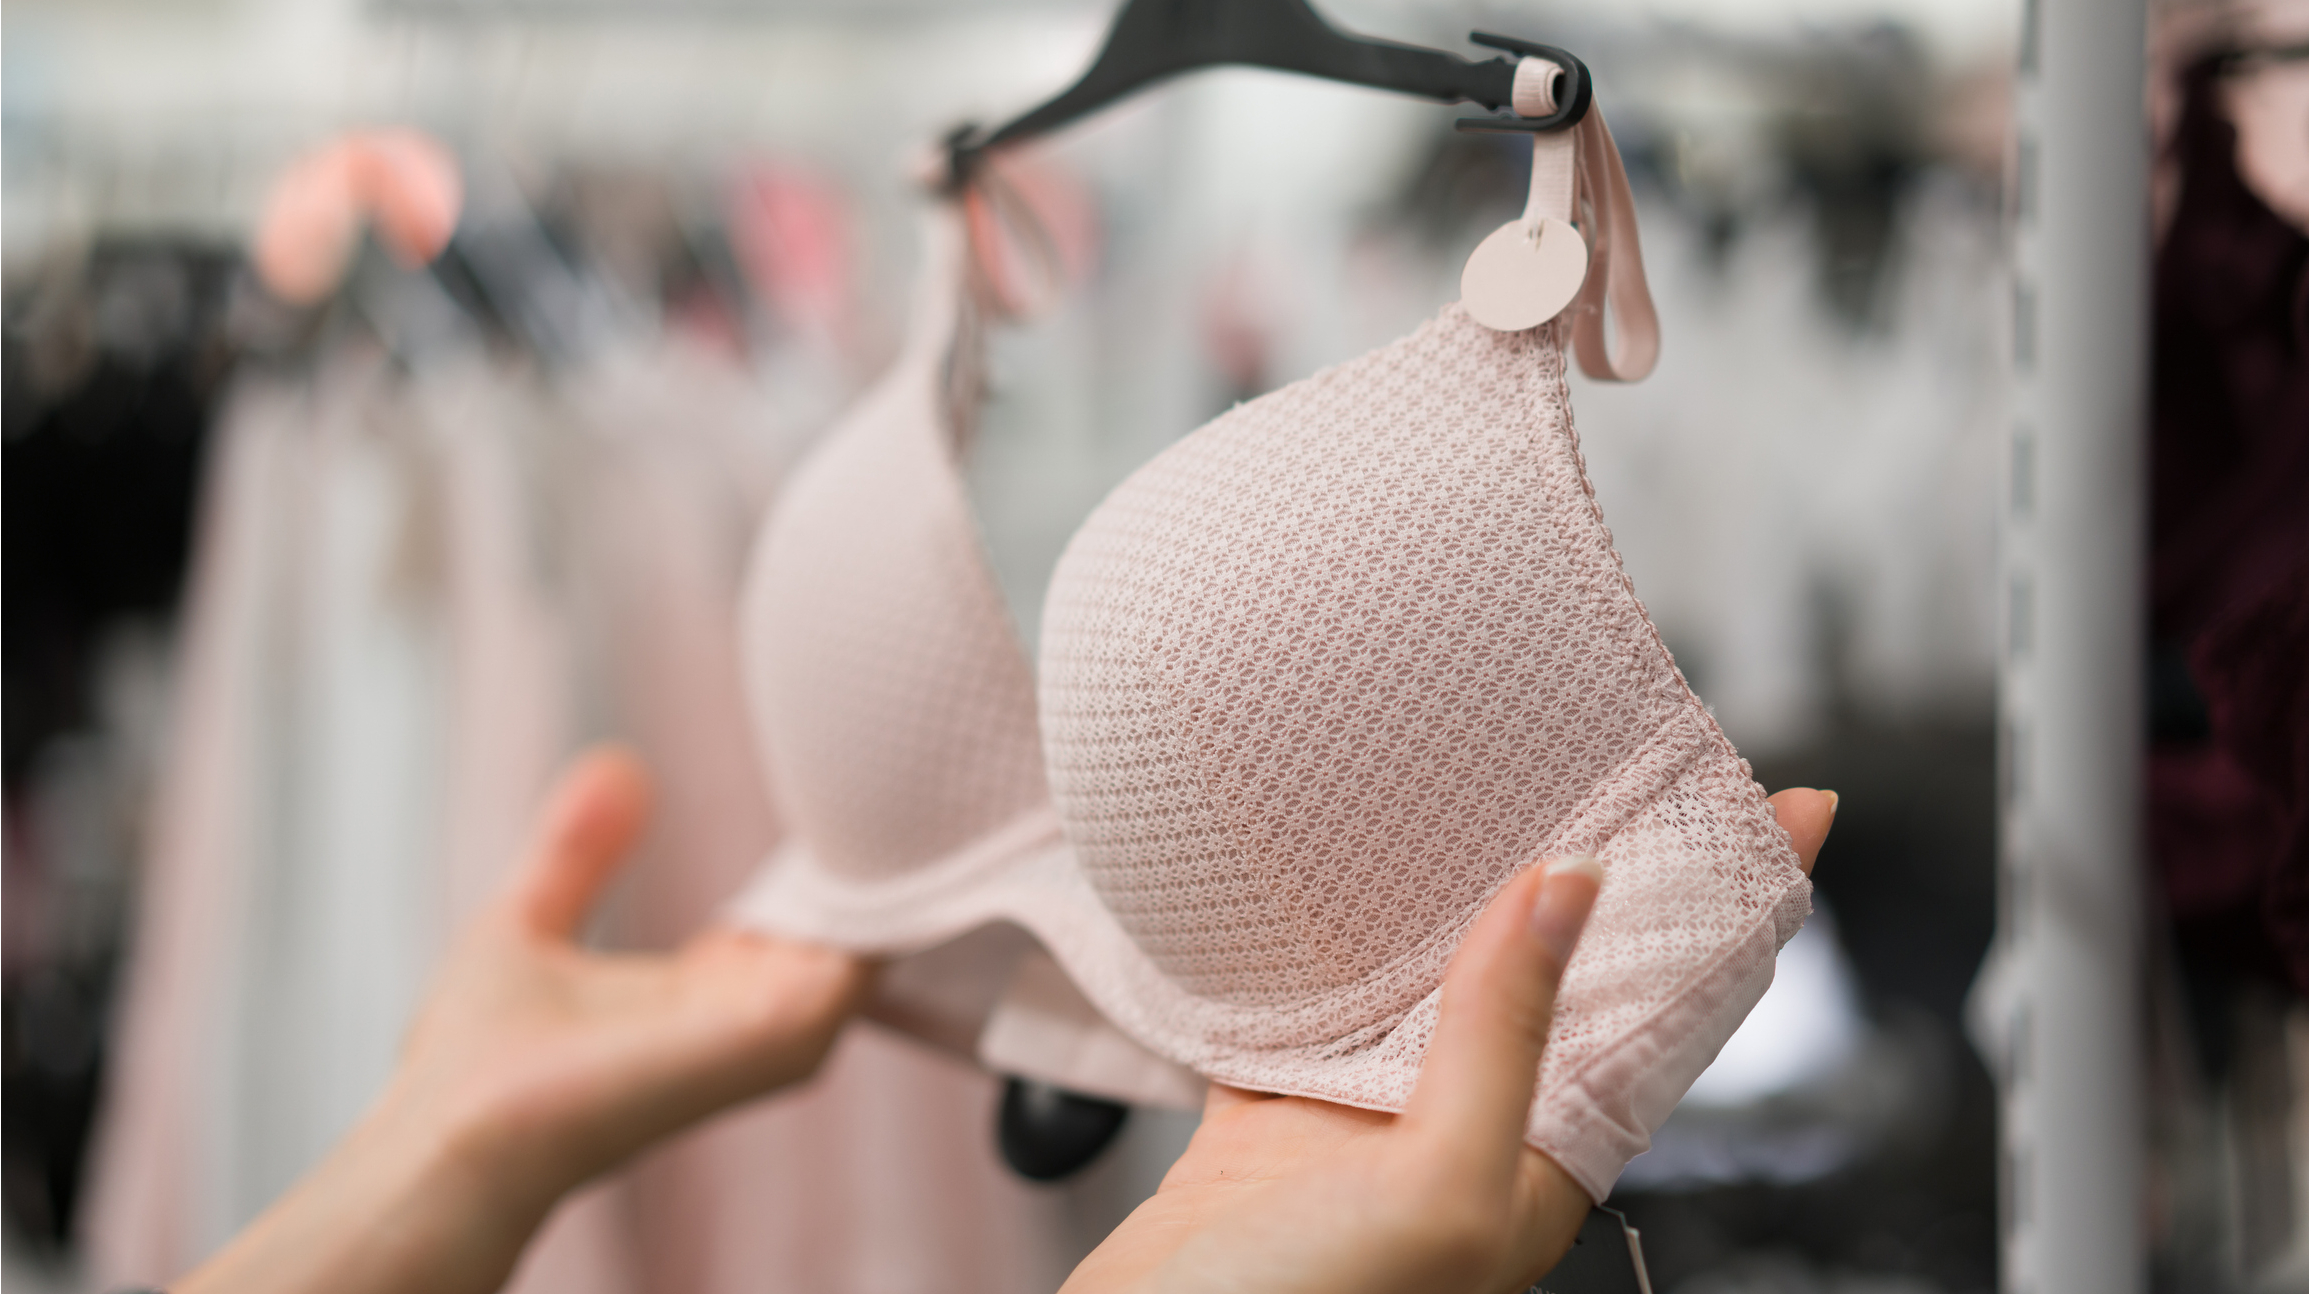 In Britain, doctors have called the imposition of VAT on bras discrimination against women